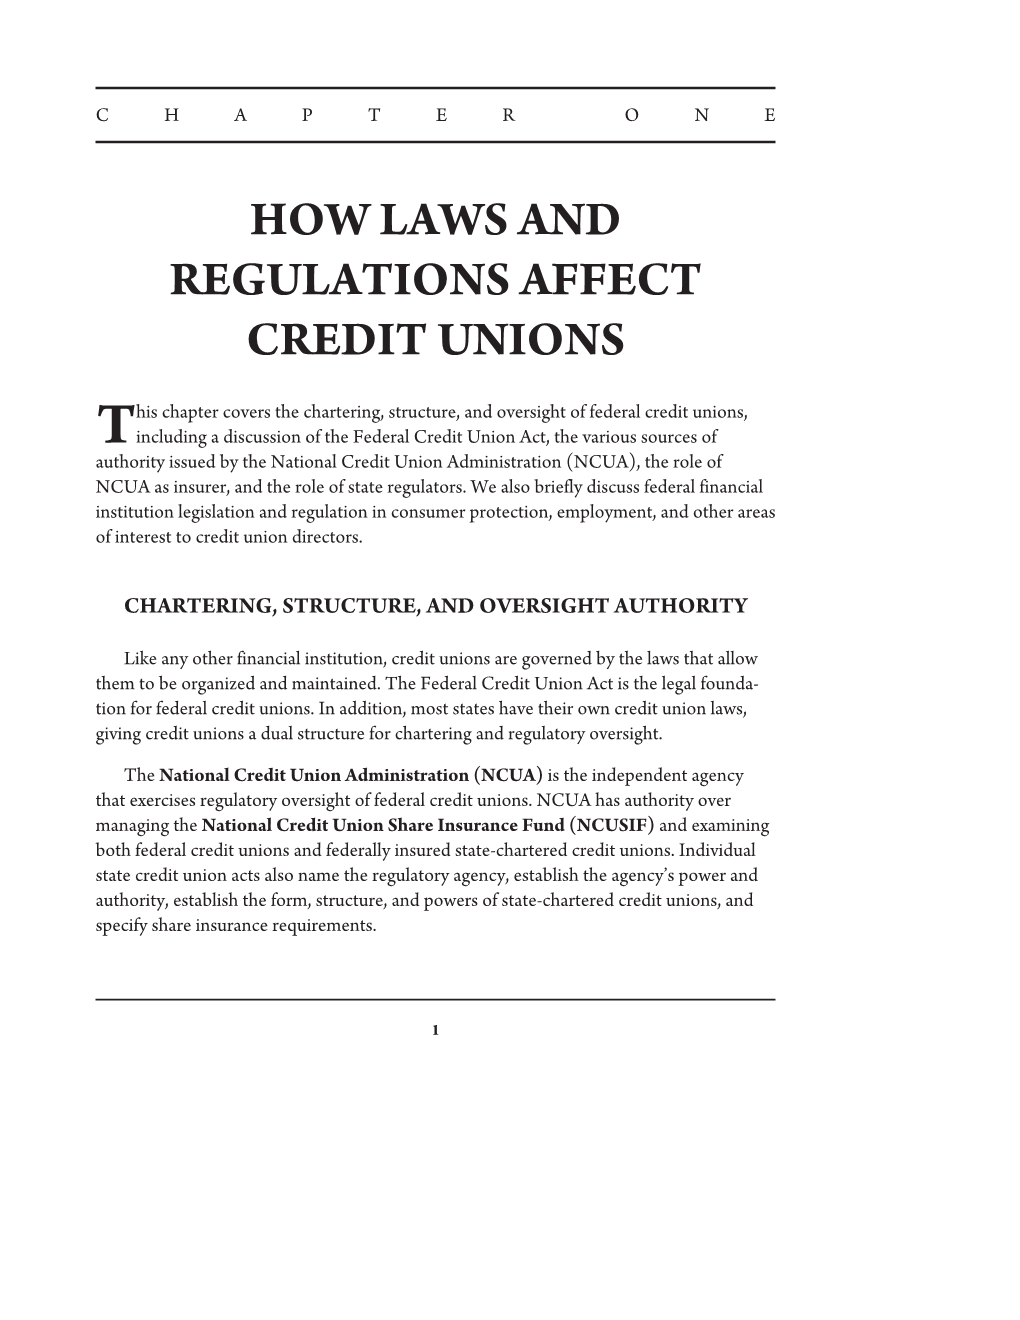 How Laws and Regulations Affect Credit Unions